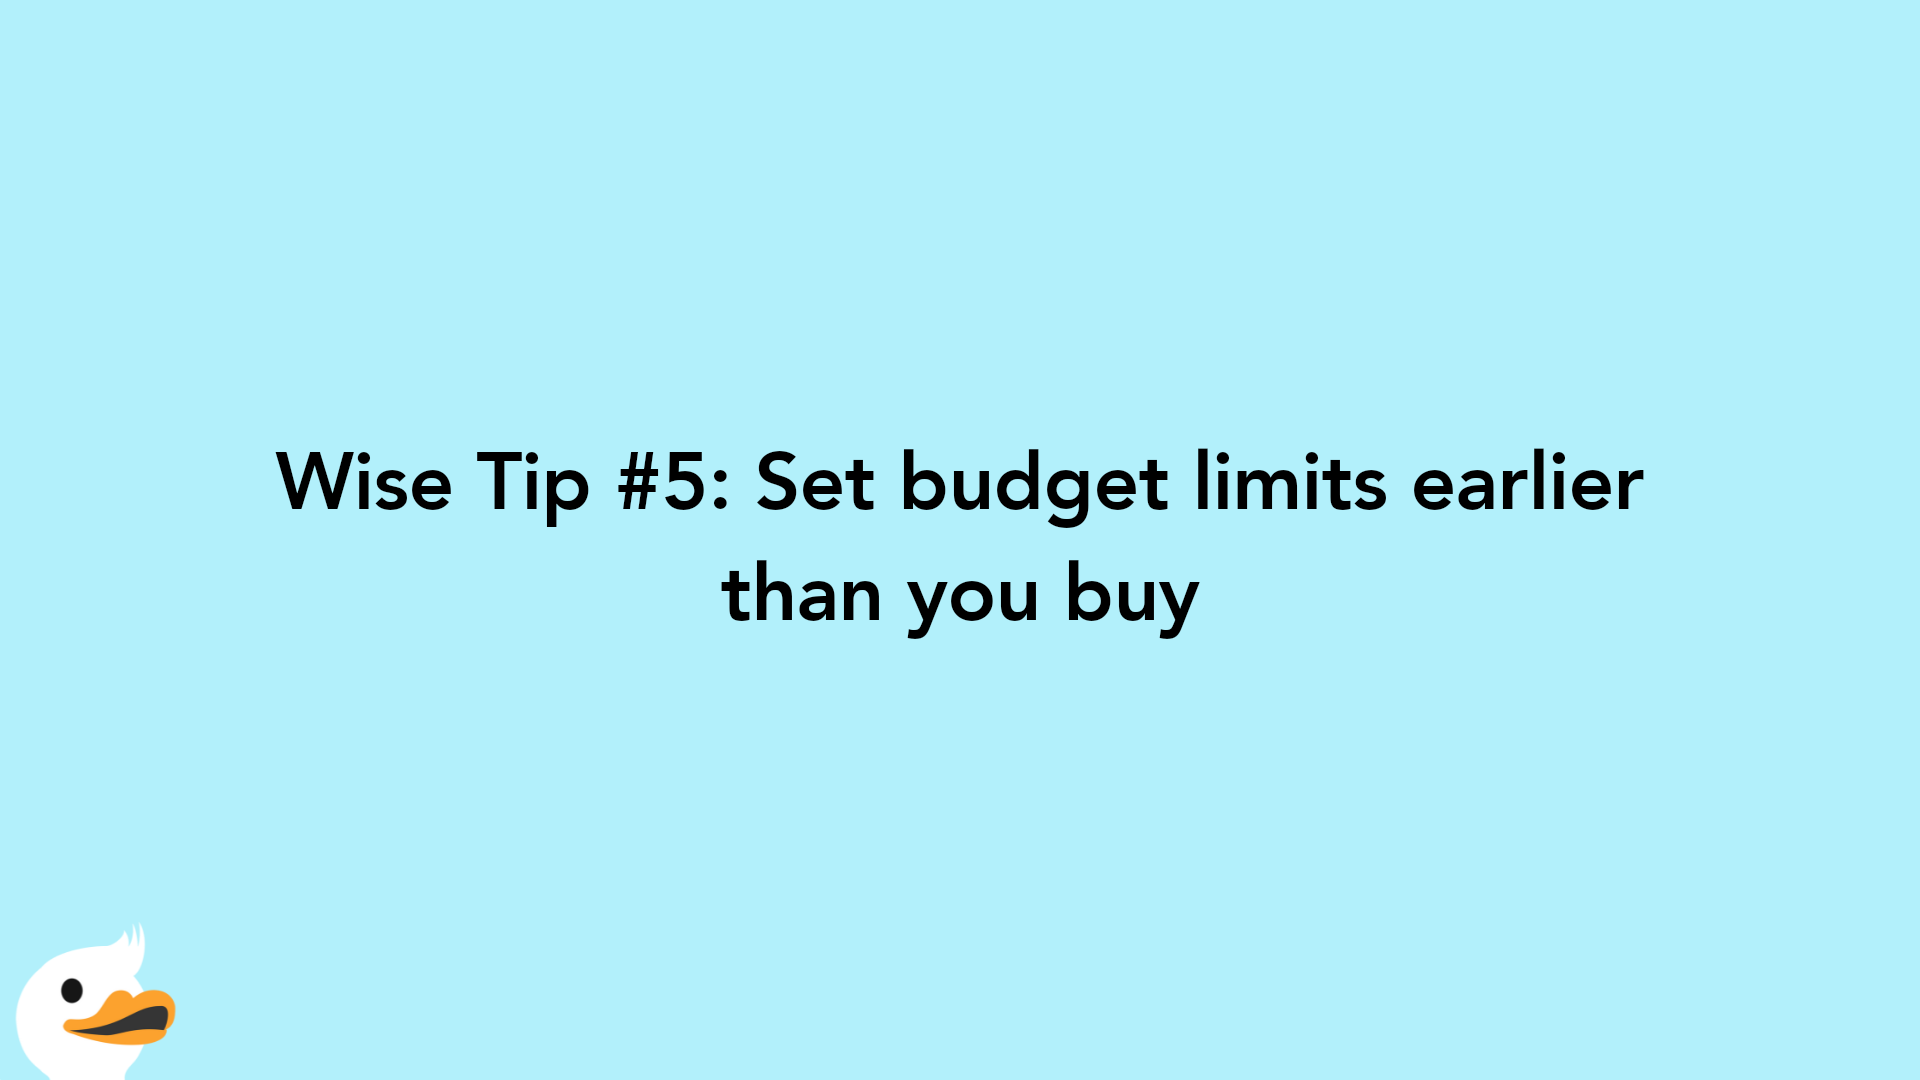 Wise Tip #5: Set budget limits earlier than you buy